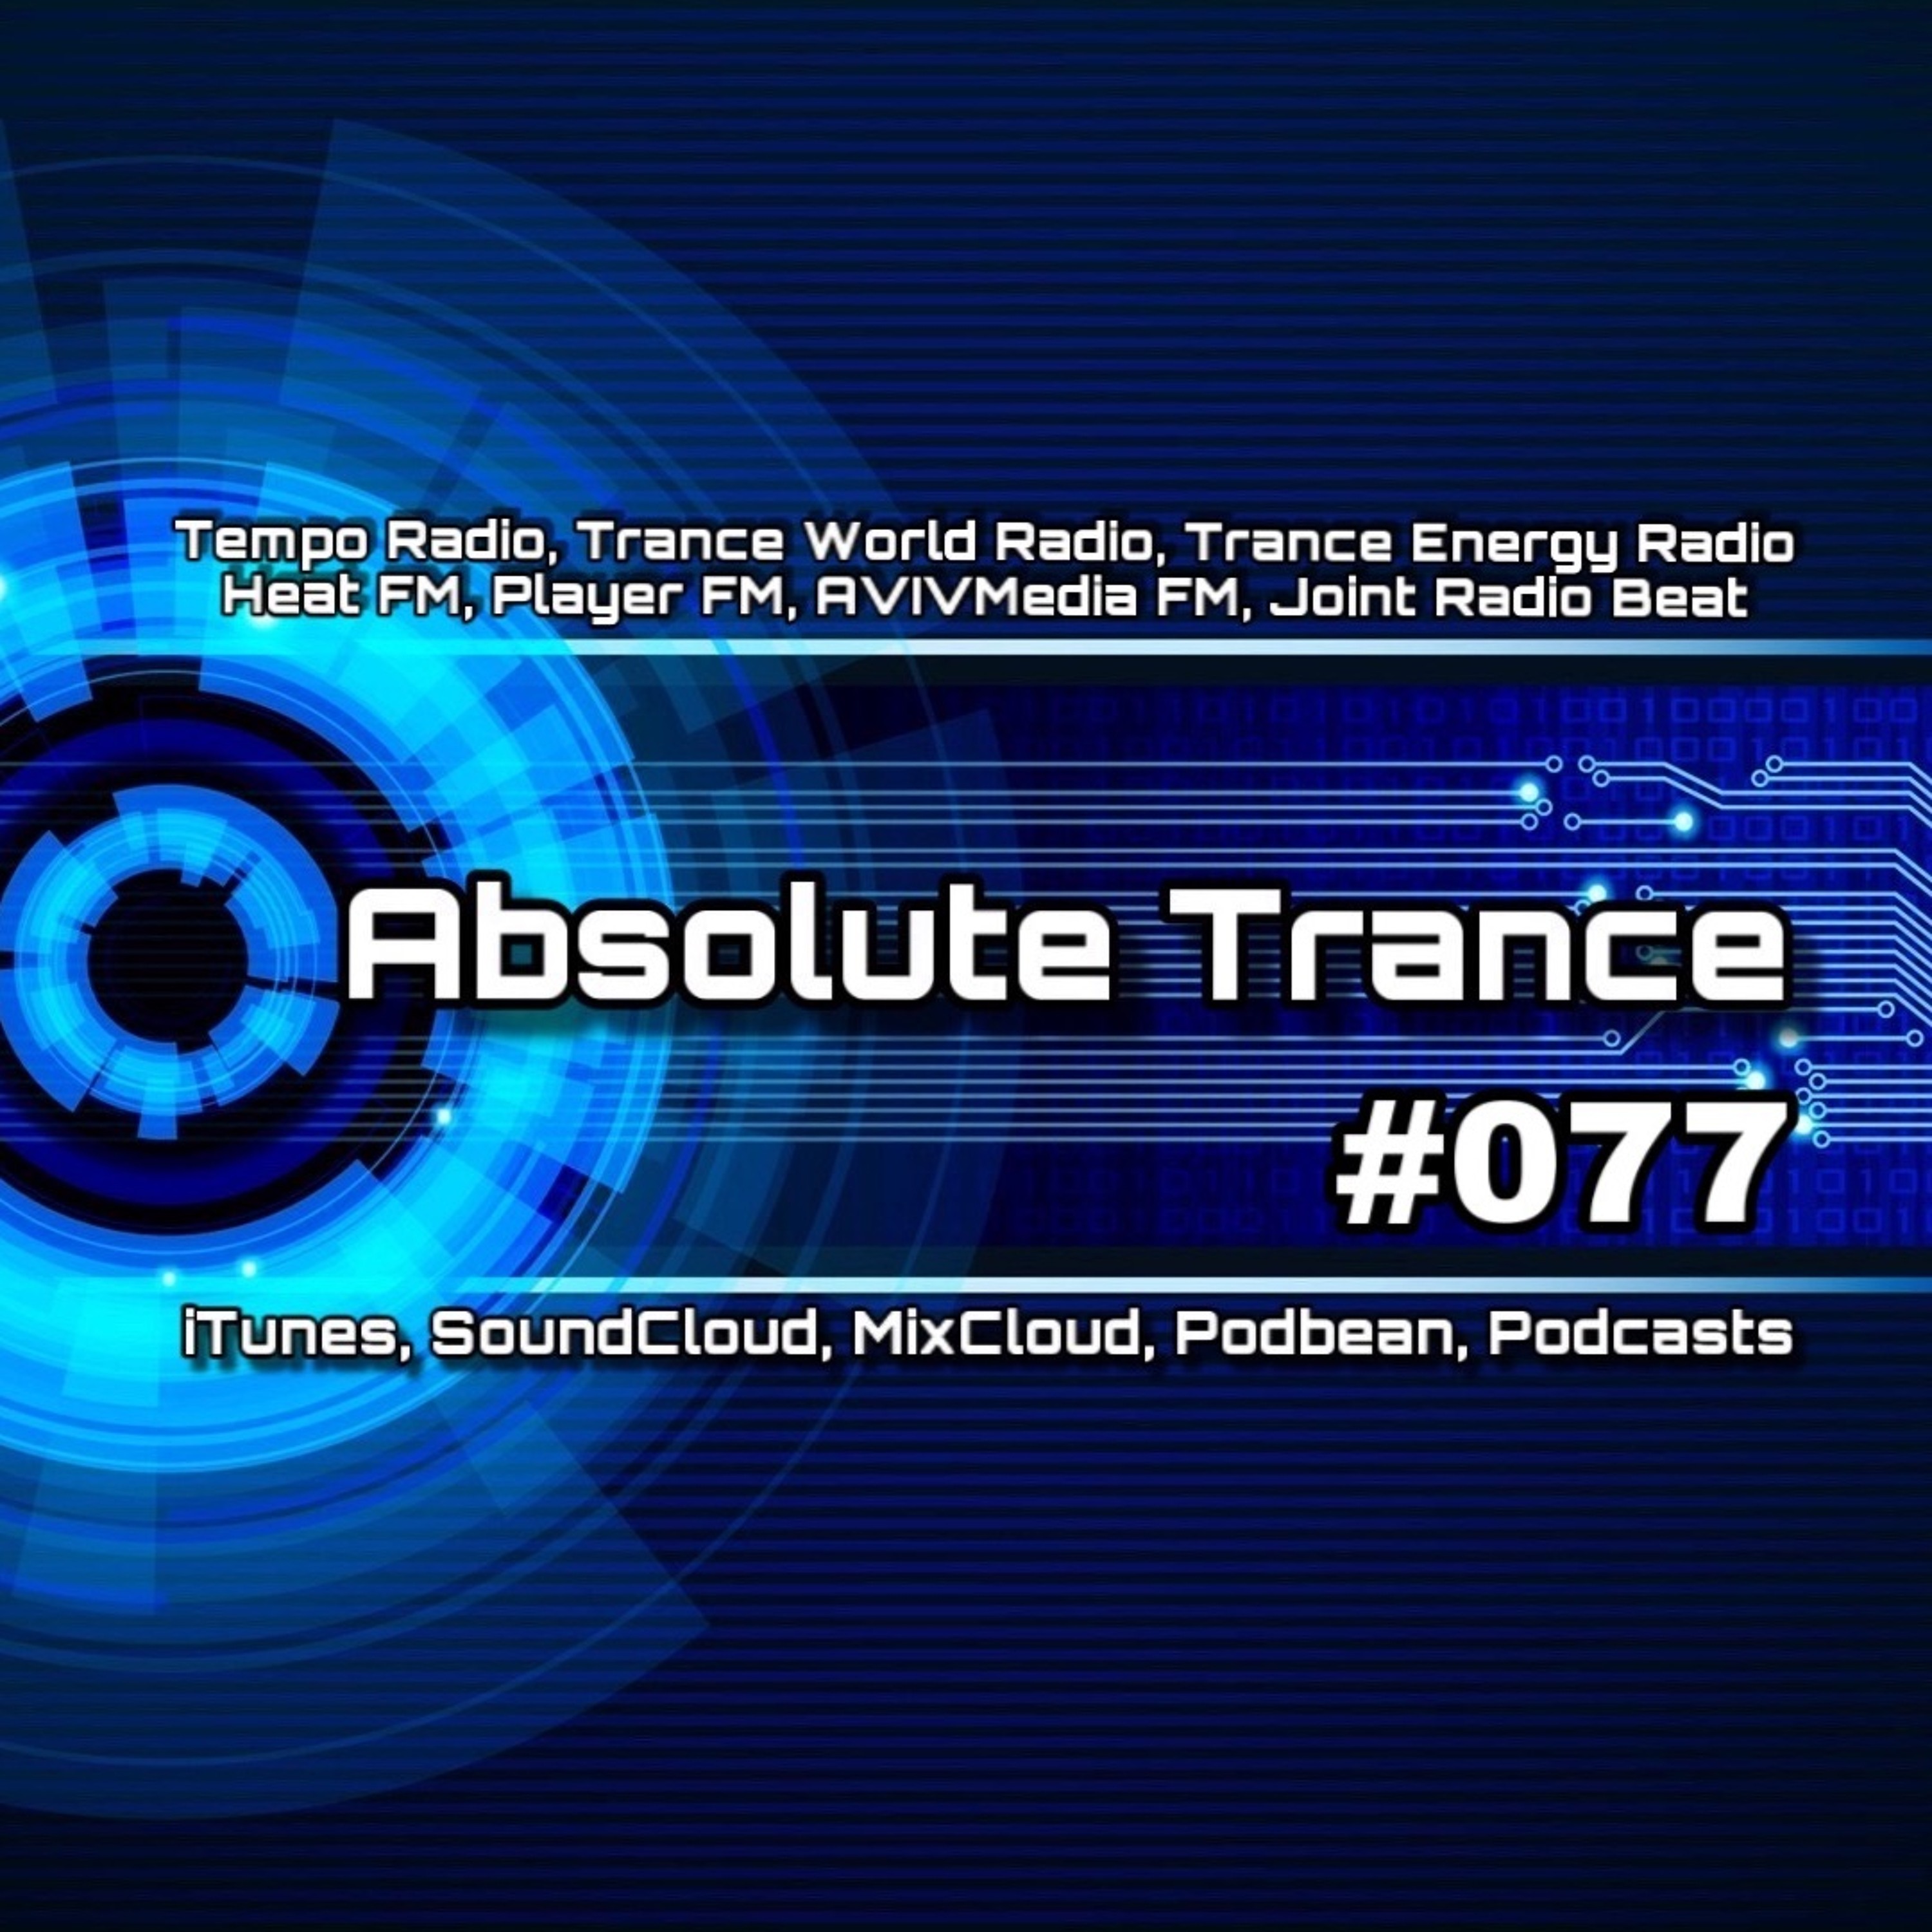 Absolute Trance #077